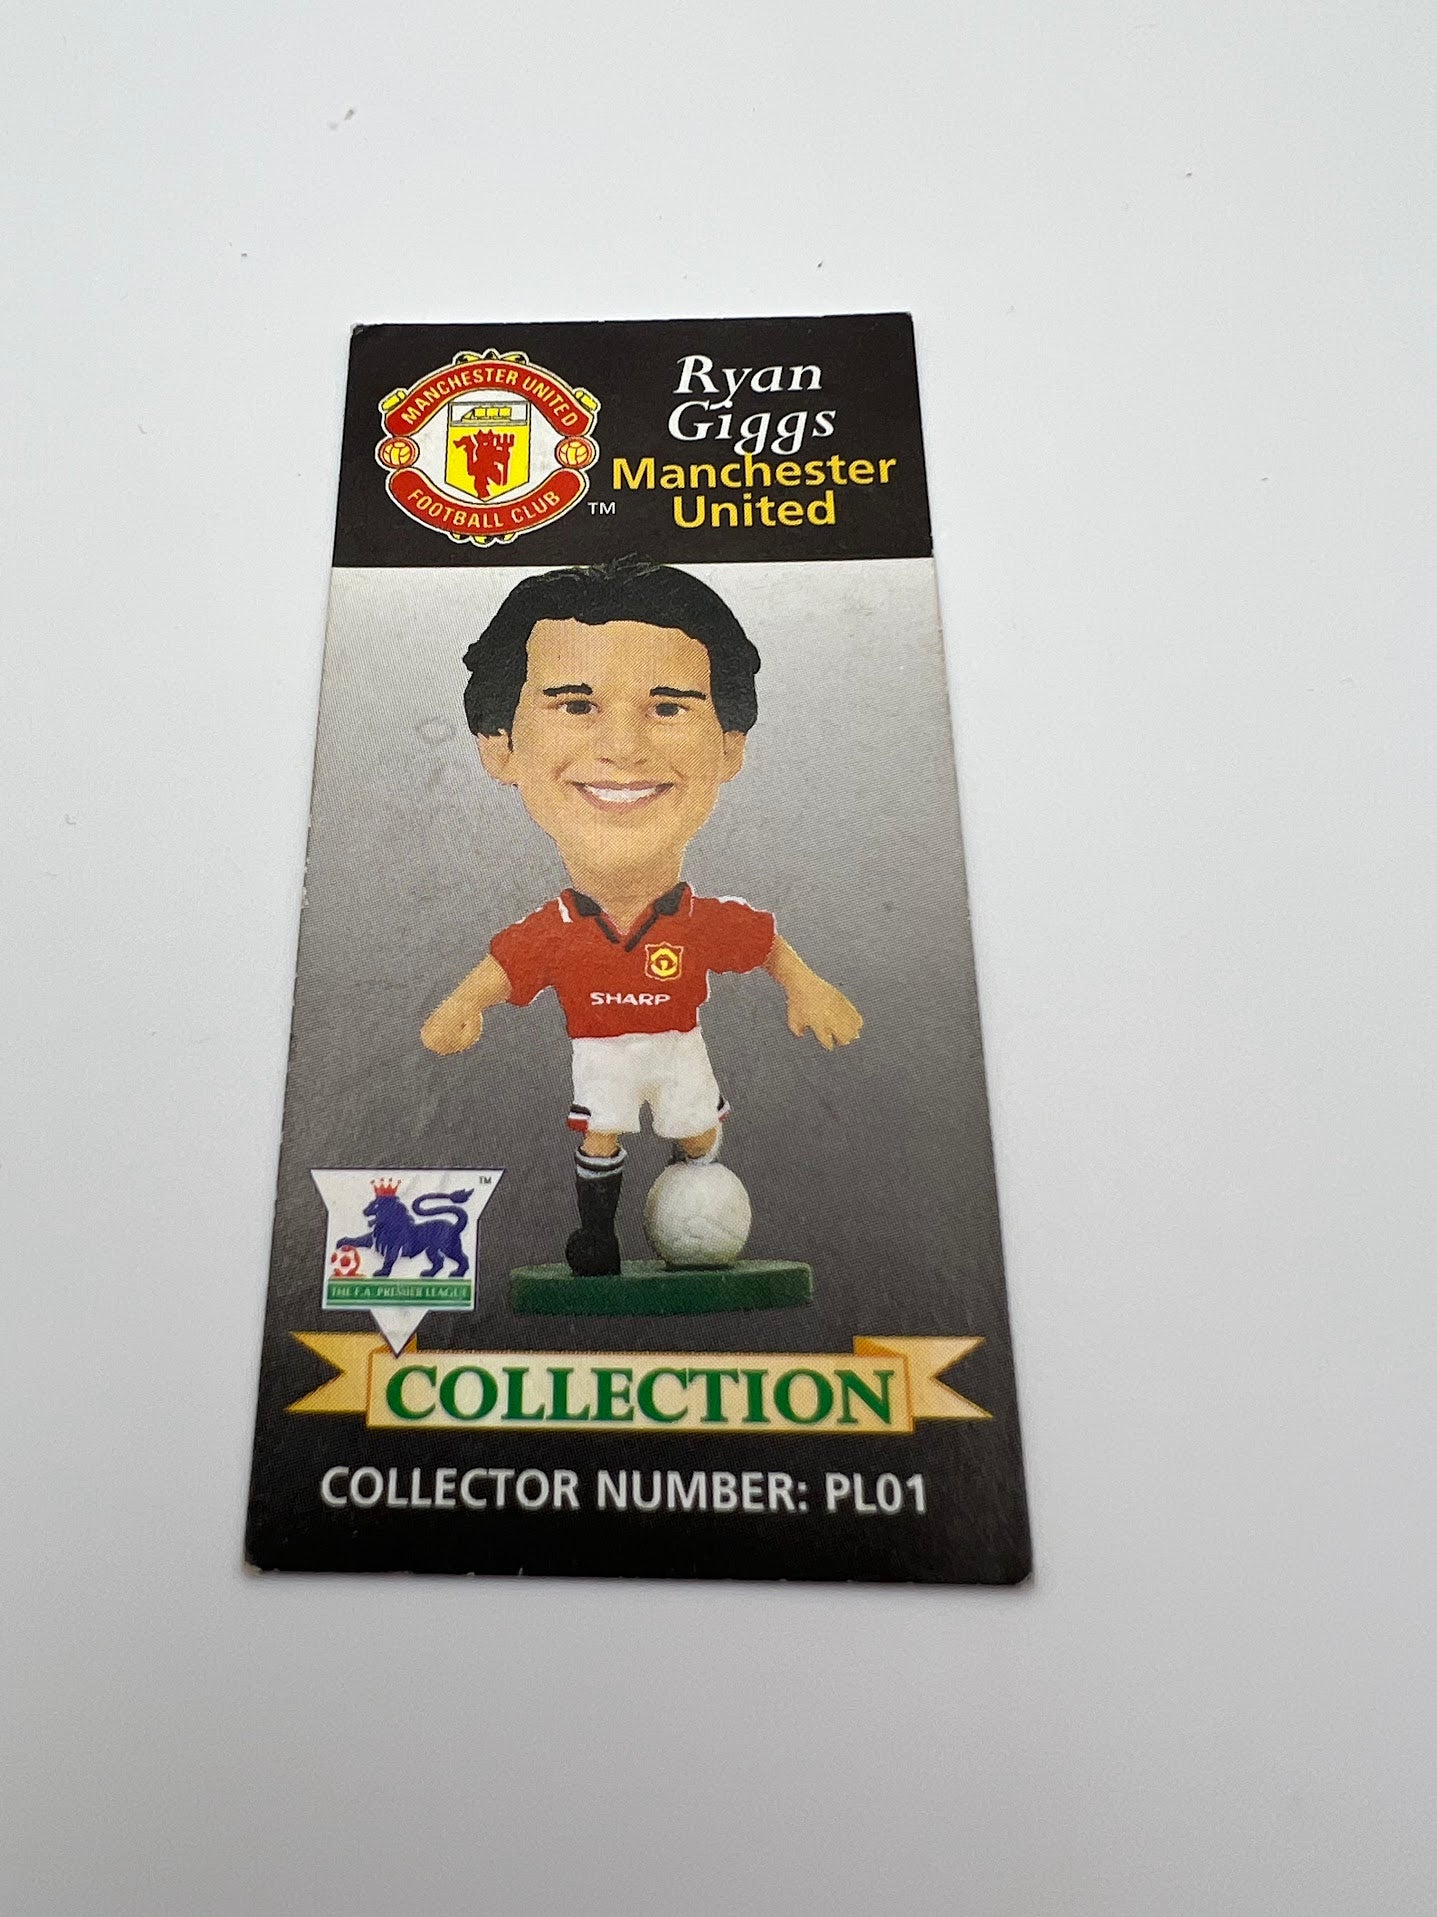 Ryan Giggs Collector Card - Manchester United - Corinthian Figure Card - PL01